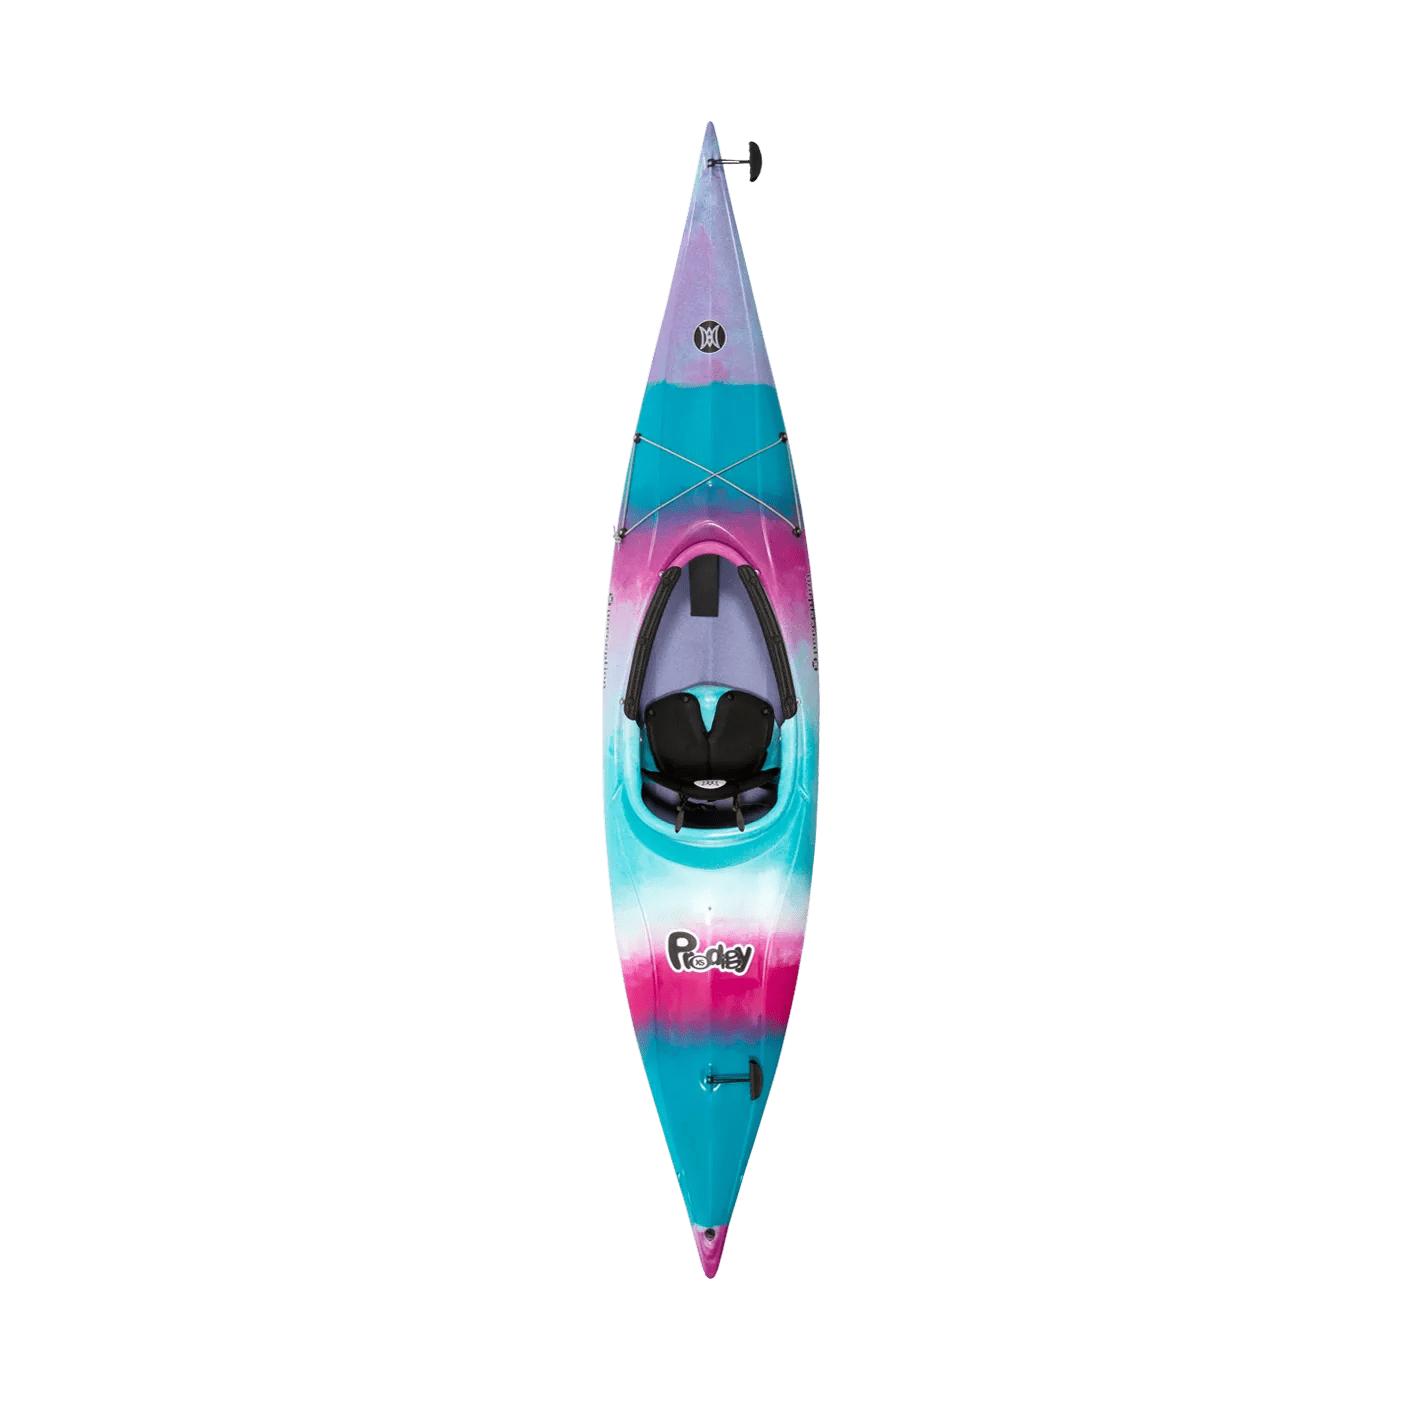 PERCEPTION - Prodigy XS Recreational Kayak - Discontinued color/model - Purple - 9330335173 - TOP 